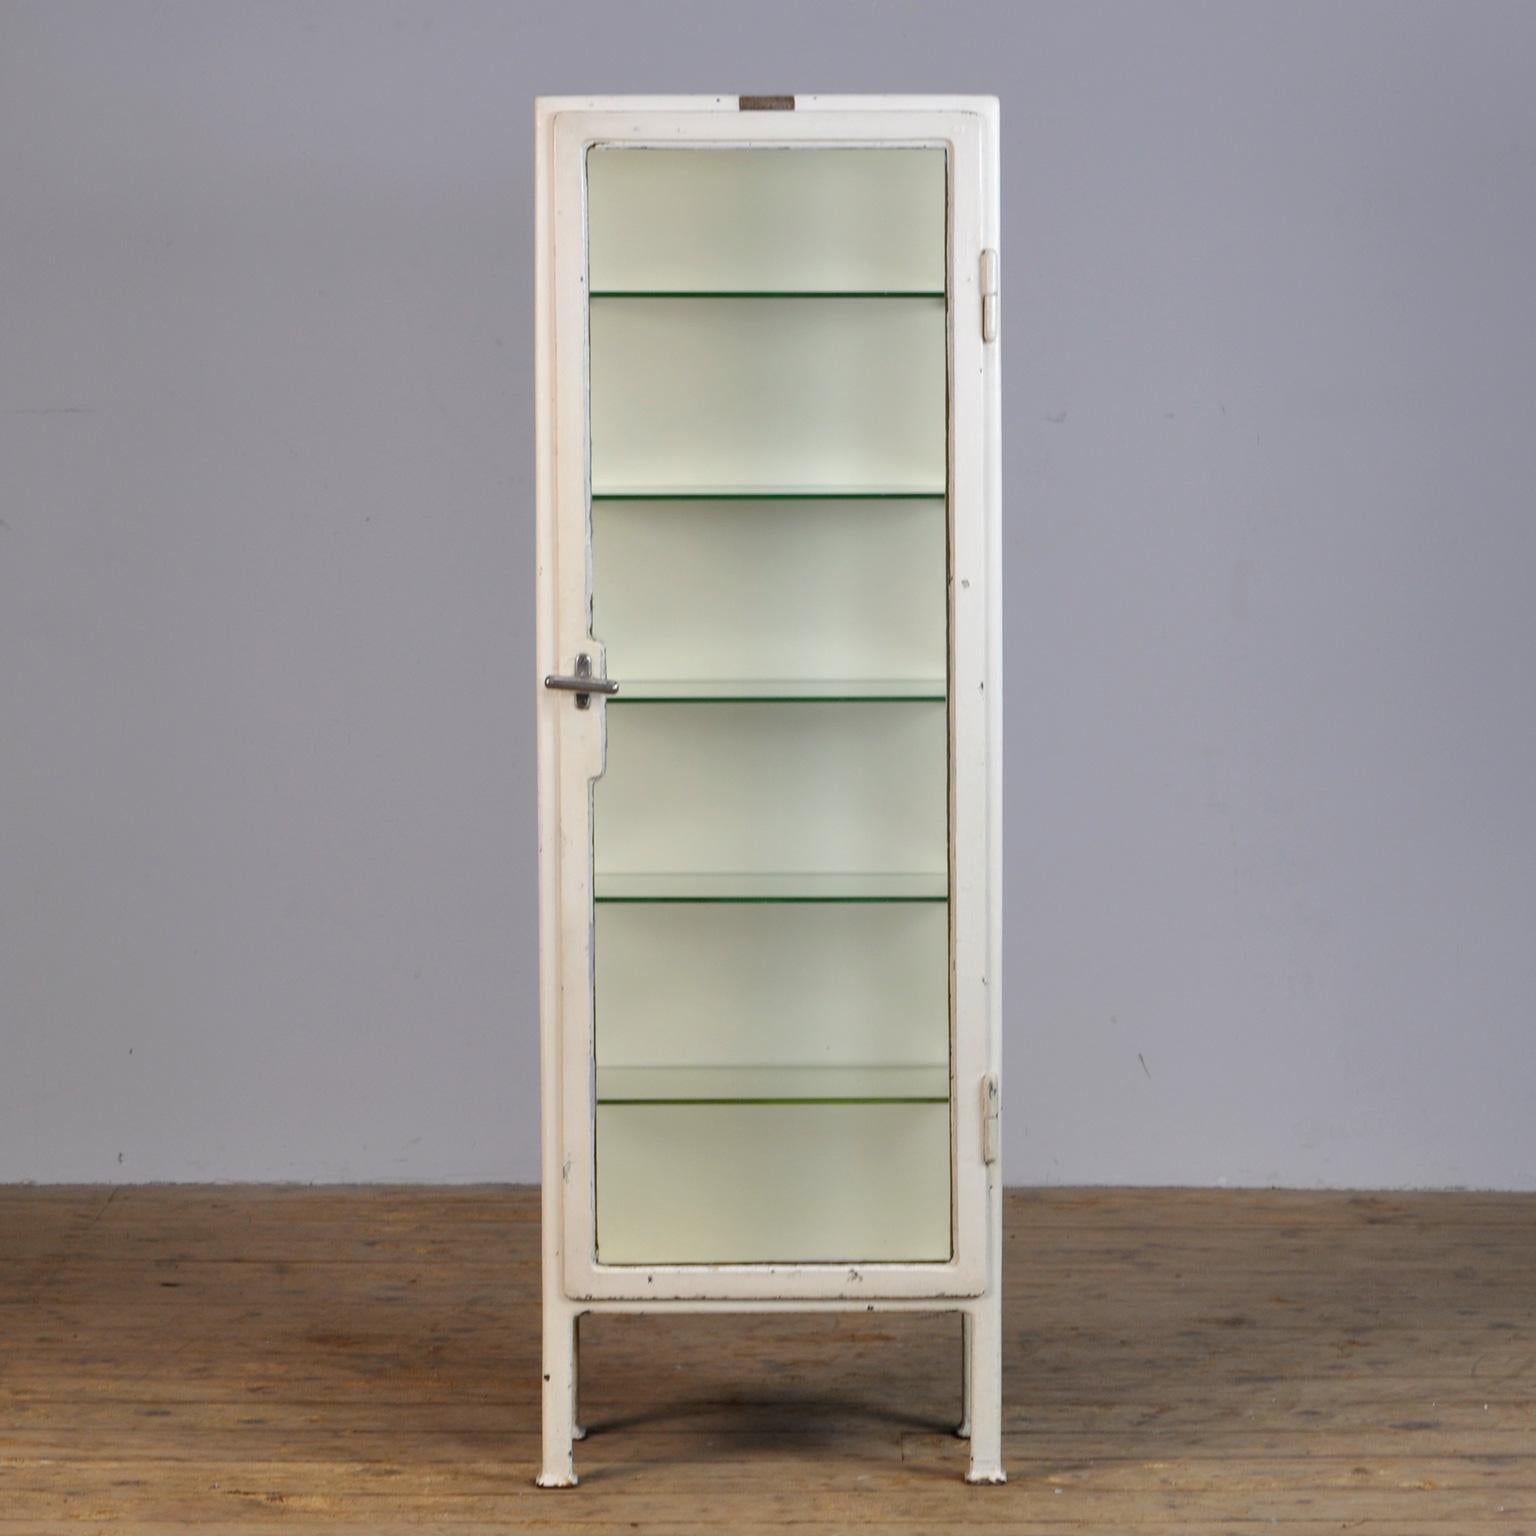 Unusual small medical cabinet from the 1930s with a label of the manufacturer above the door. The cabinet is produced in Hungary and is made of thick iron and the original antique glass. With the original glass plates, lock and handle.